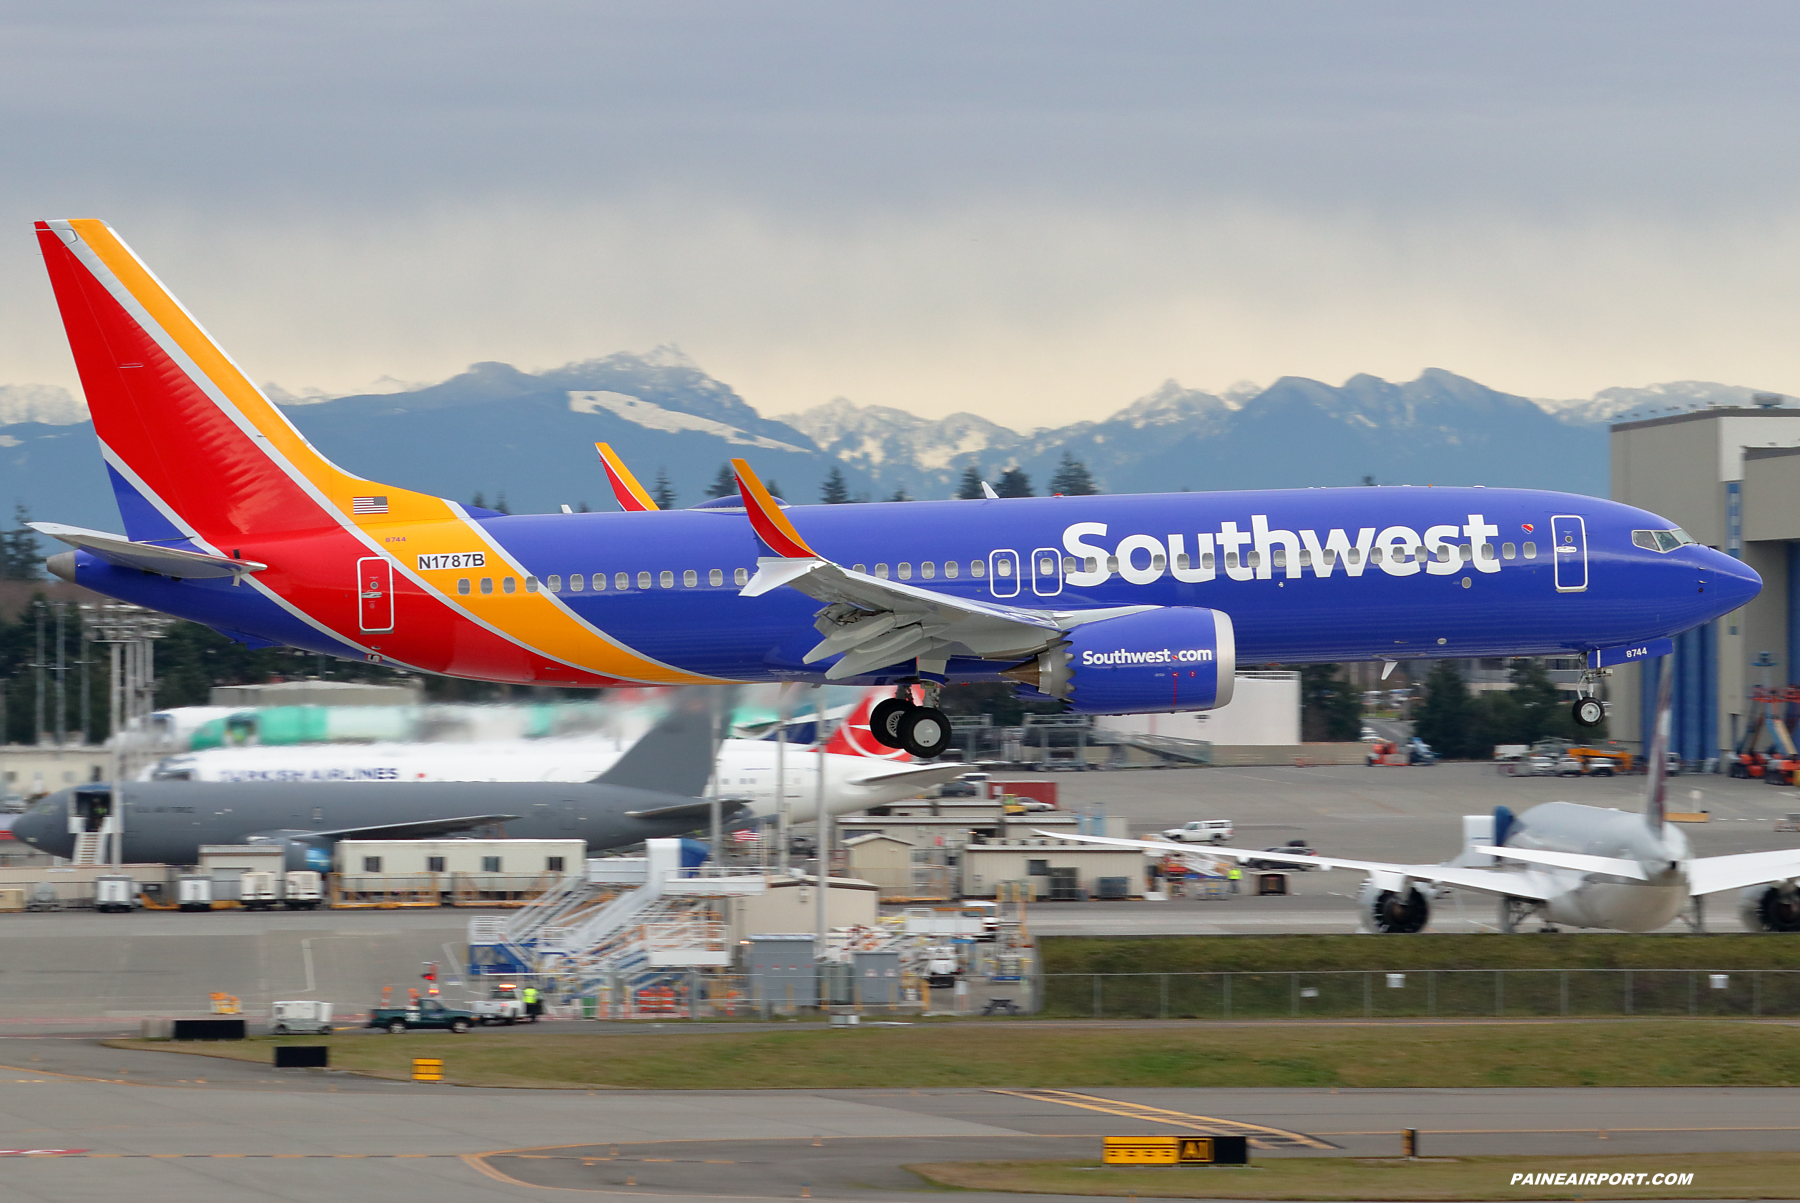 Southwest Airlines 737 N1787B at Paine Field